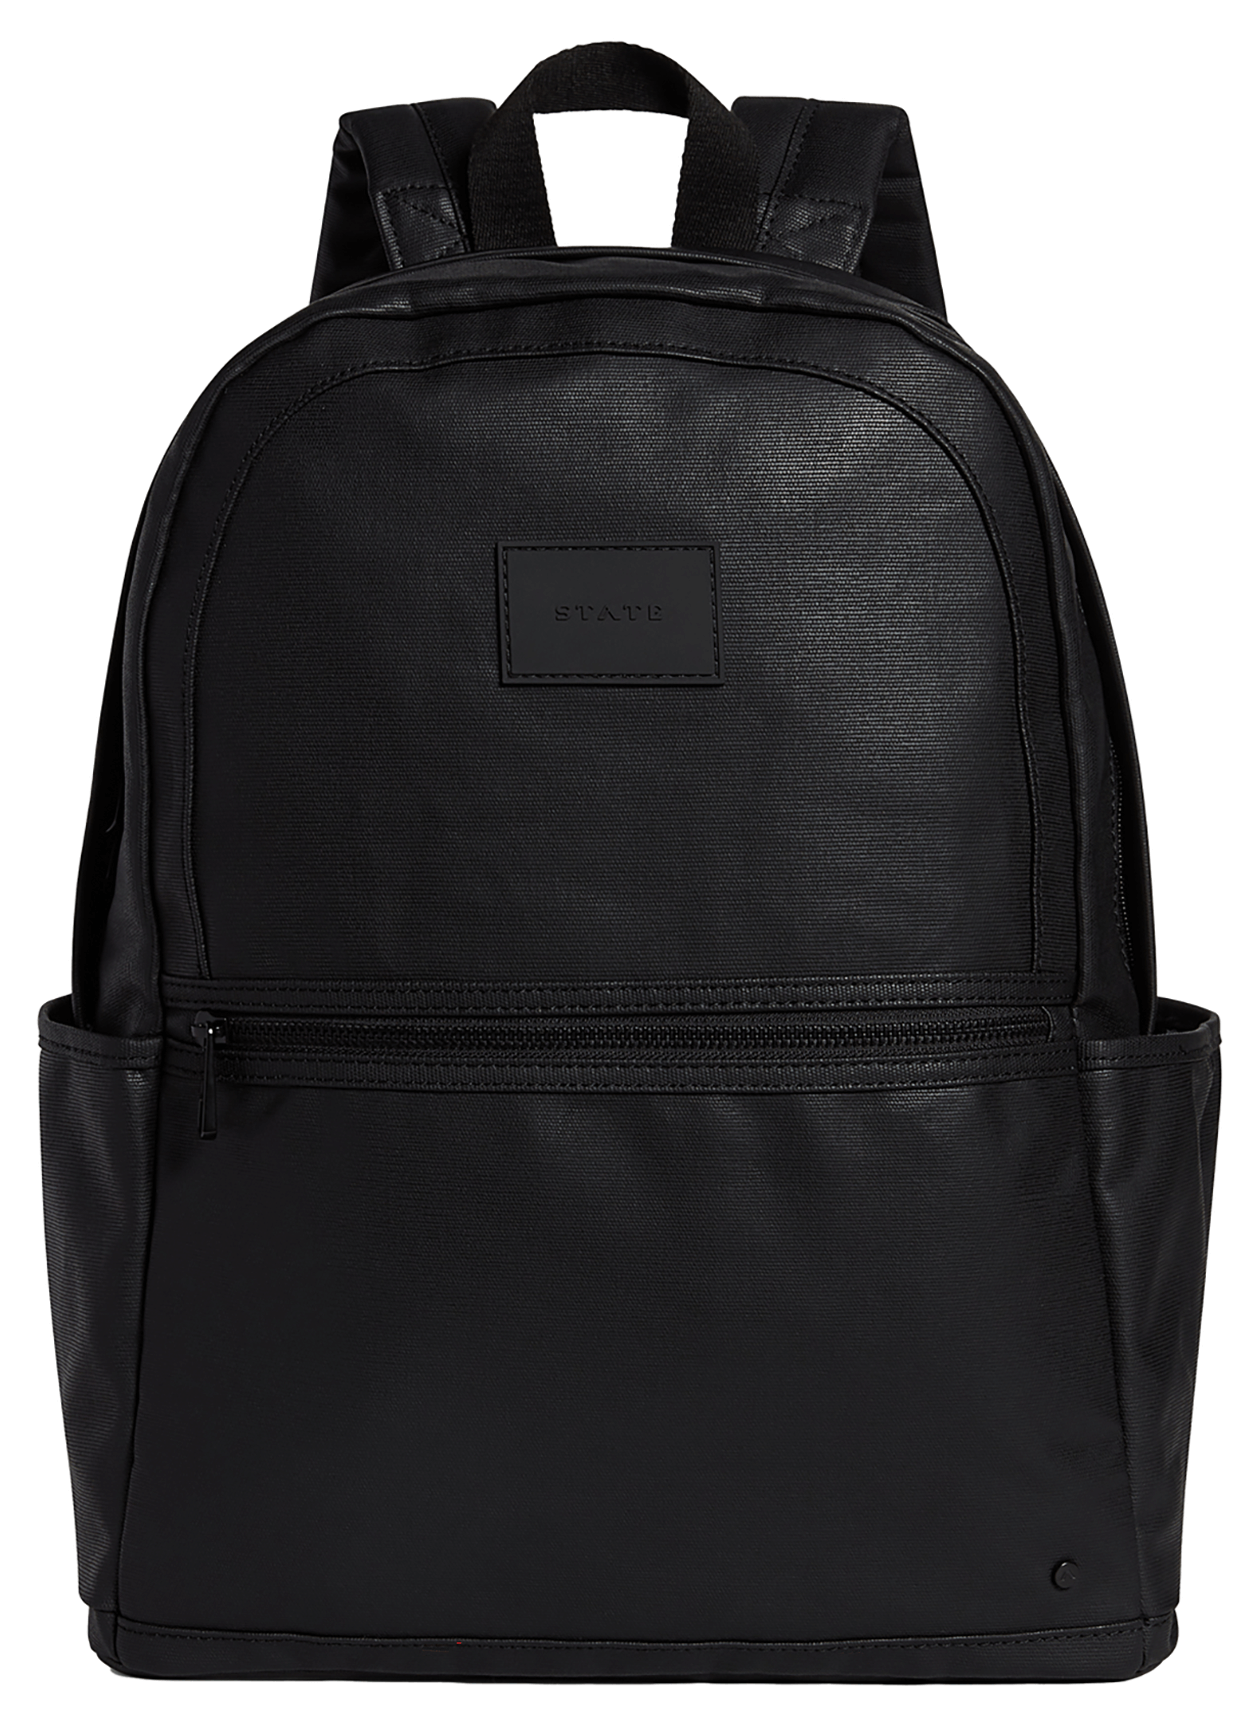 STATE Bags F2174385 - Kane Large Double Pocket Coated Canvas Backpack